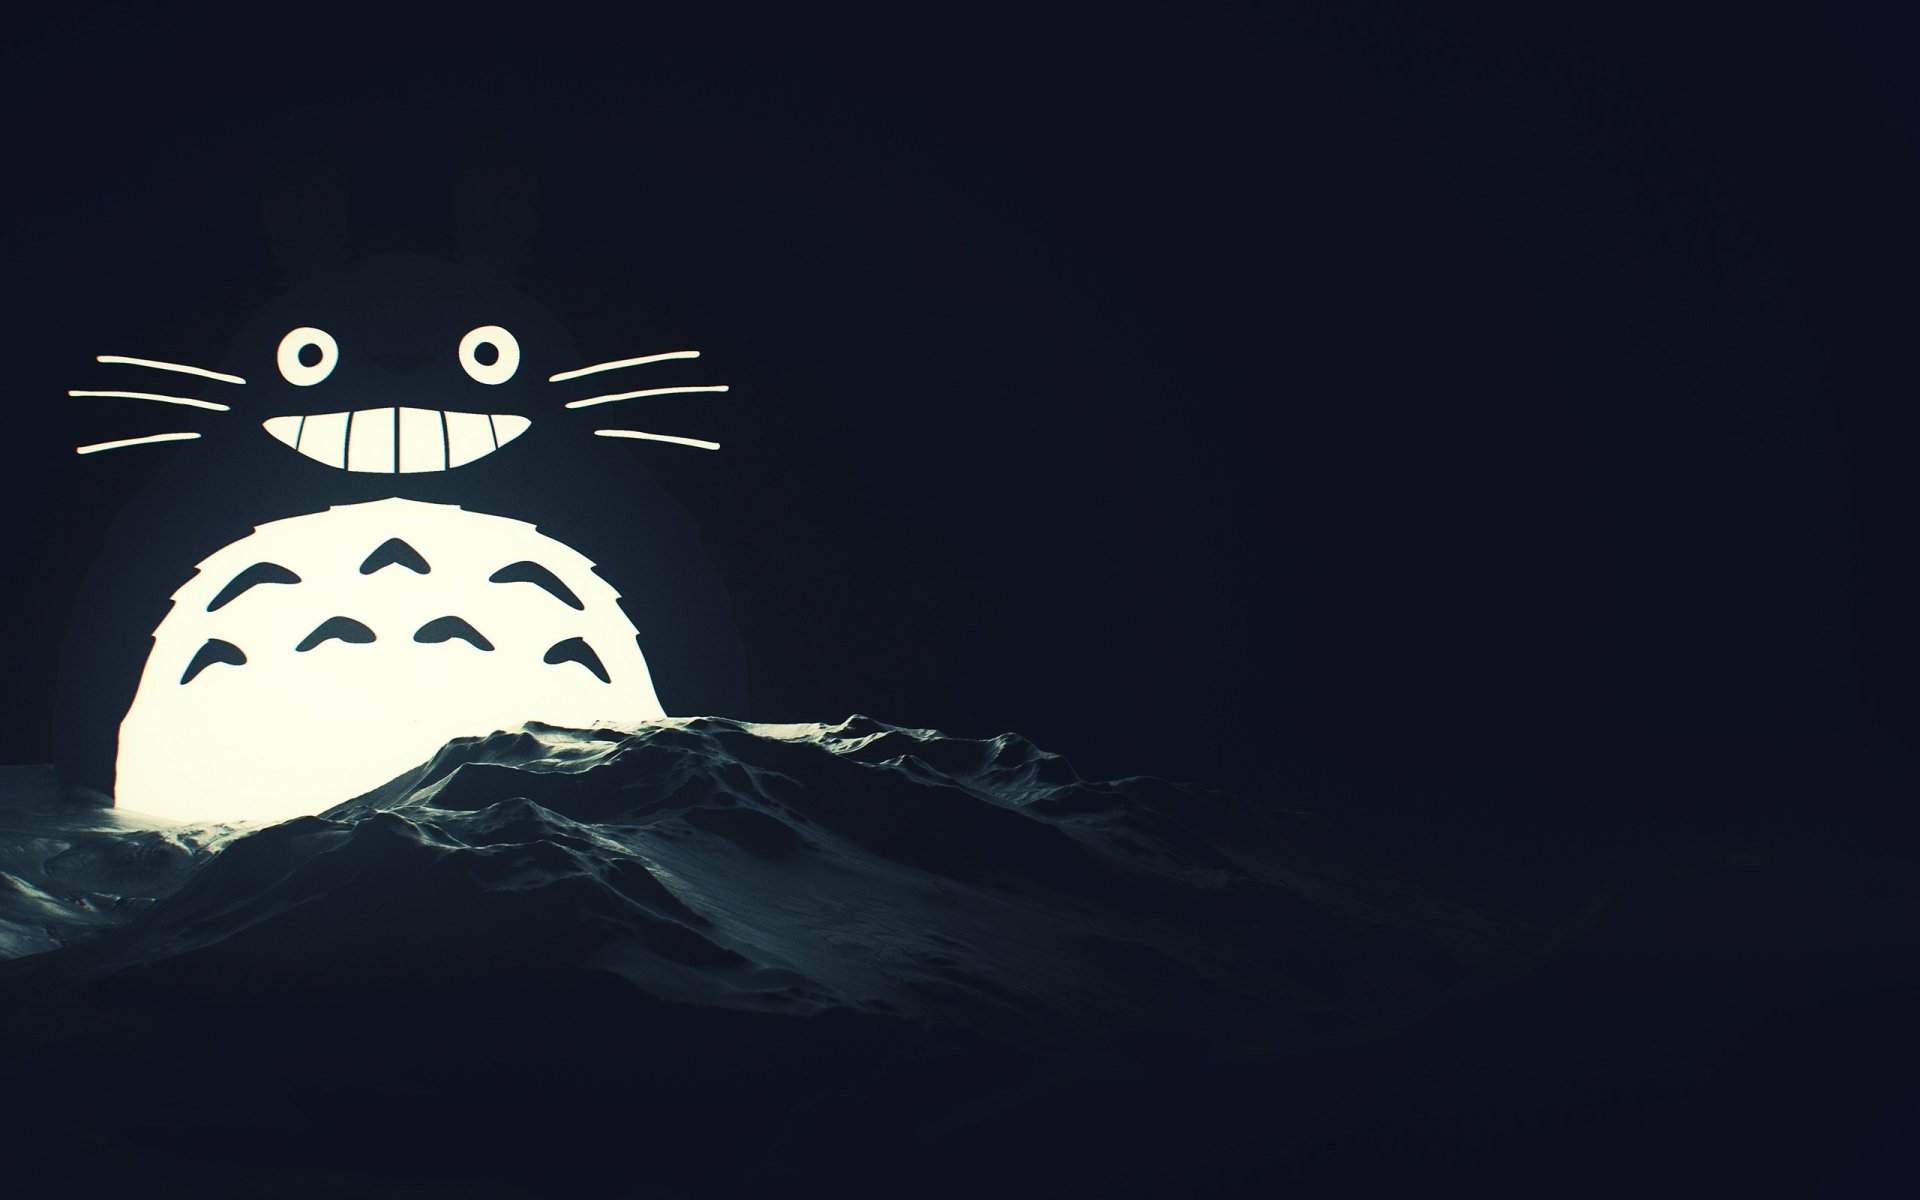 HD wallpaper featuring Totoro from My Neighbor Totoro illuminated against a dark background.